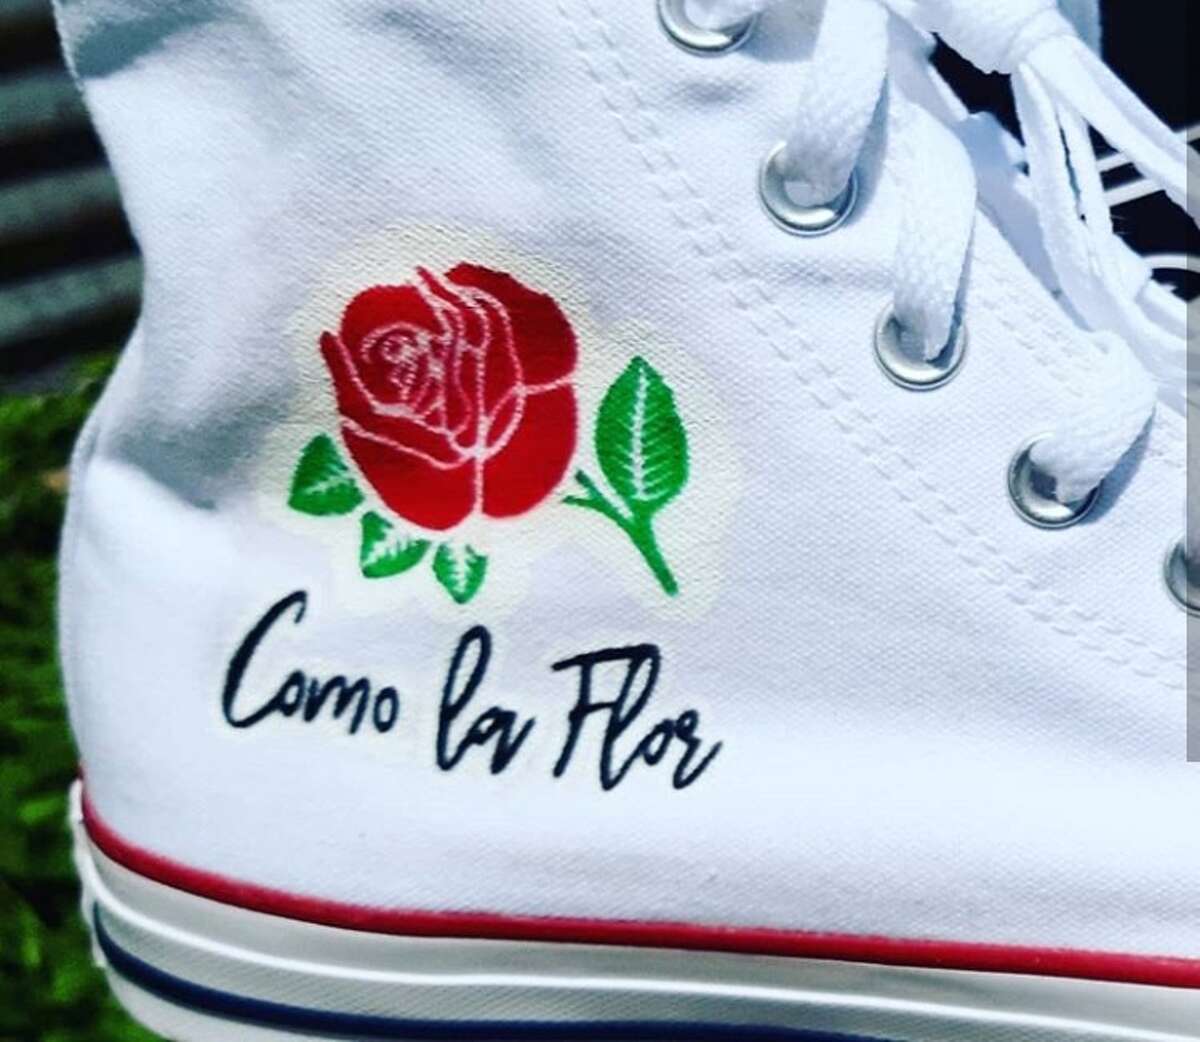 Juan Garcia III, owner of J3 Customs, created art fit for the Tejano Queen on a pair of Converse for a fan named Jorge Bernal. Garcia said Bernal contacted him with the idea to create a Selena-themed pair to wear to Fiesta de la Flor, the annual festival celebrating Selena's life and legacy, and Garcia was happy to get the job done.